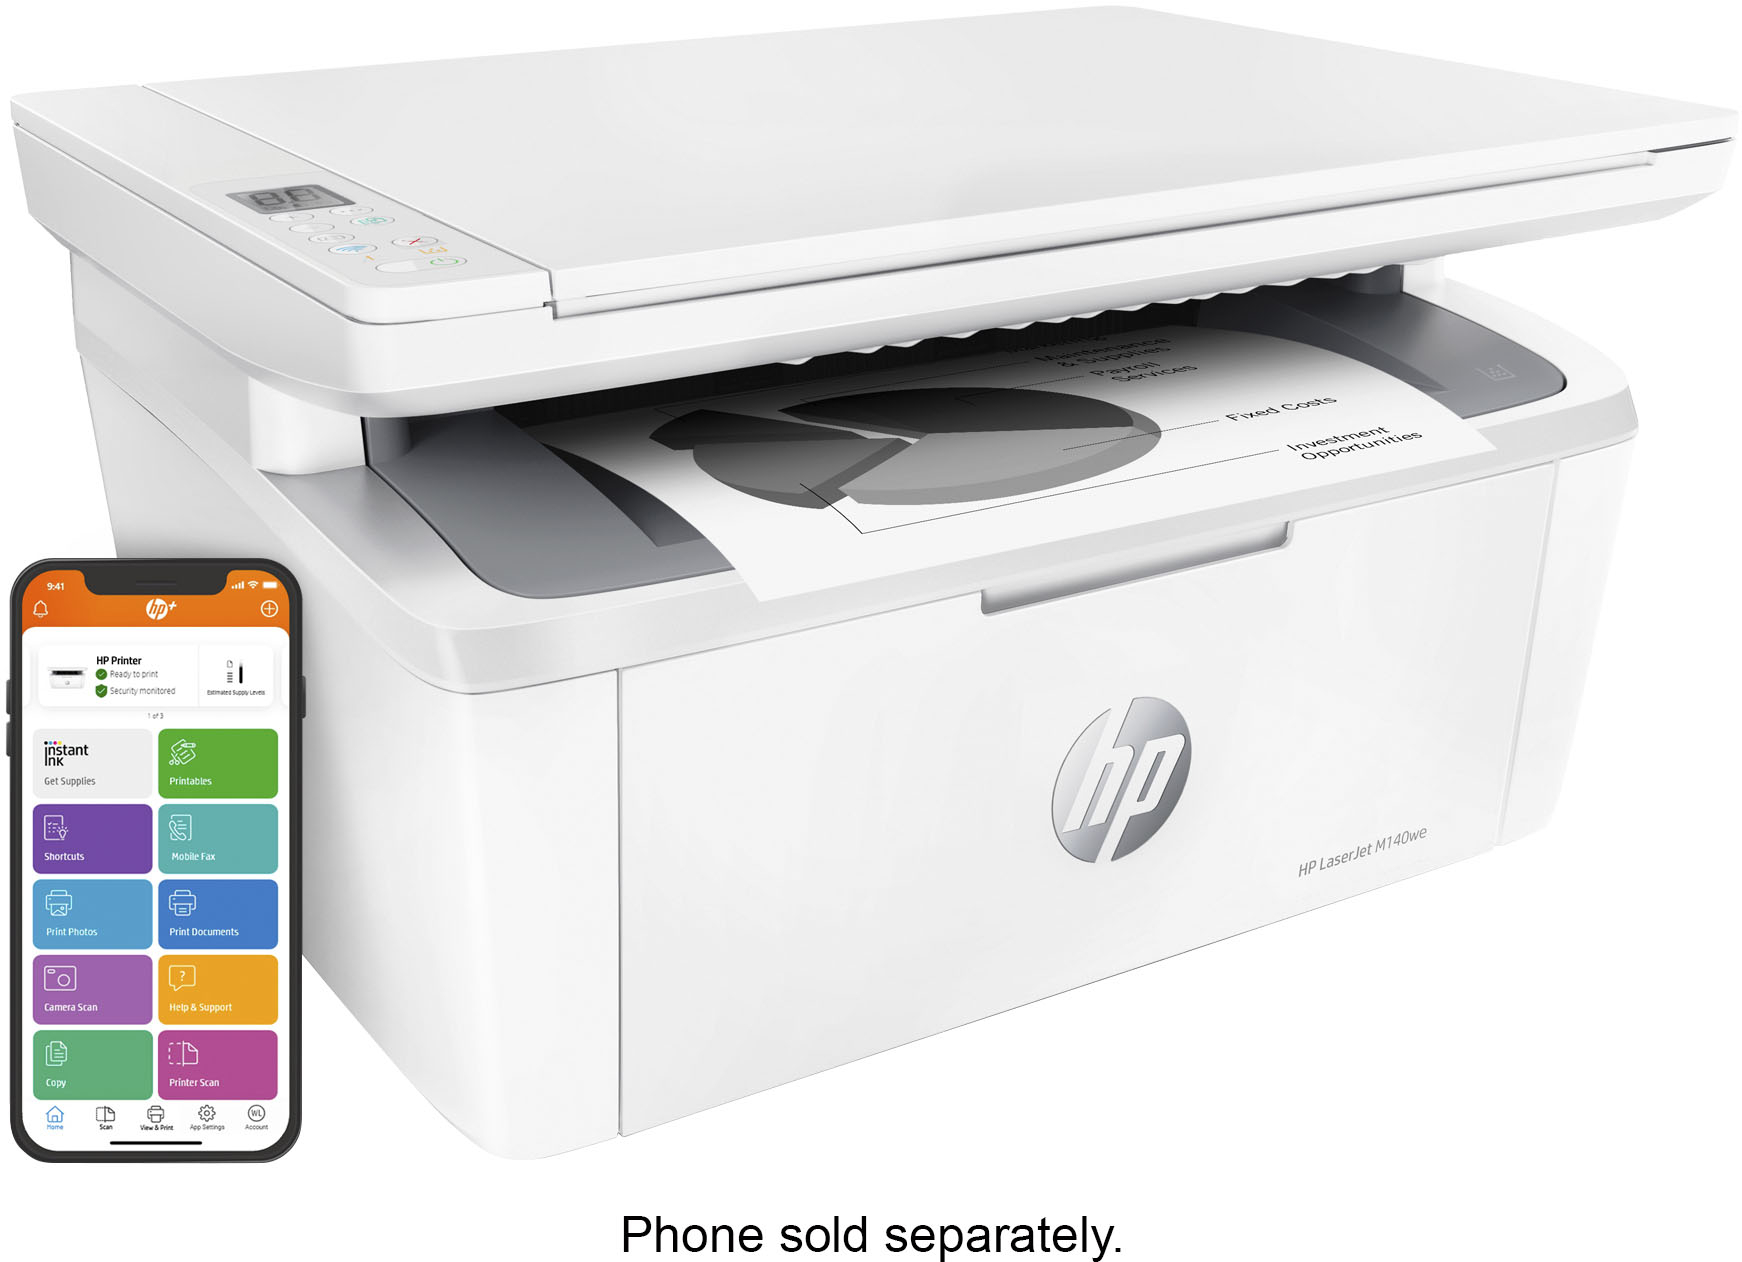 months 6 Laser Best Ink Buy - HP HP+ White M140we Printer Wireless M140we with with of White Black and included LaserJet LaserJet Instant